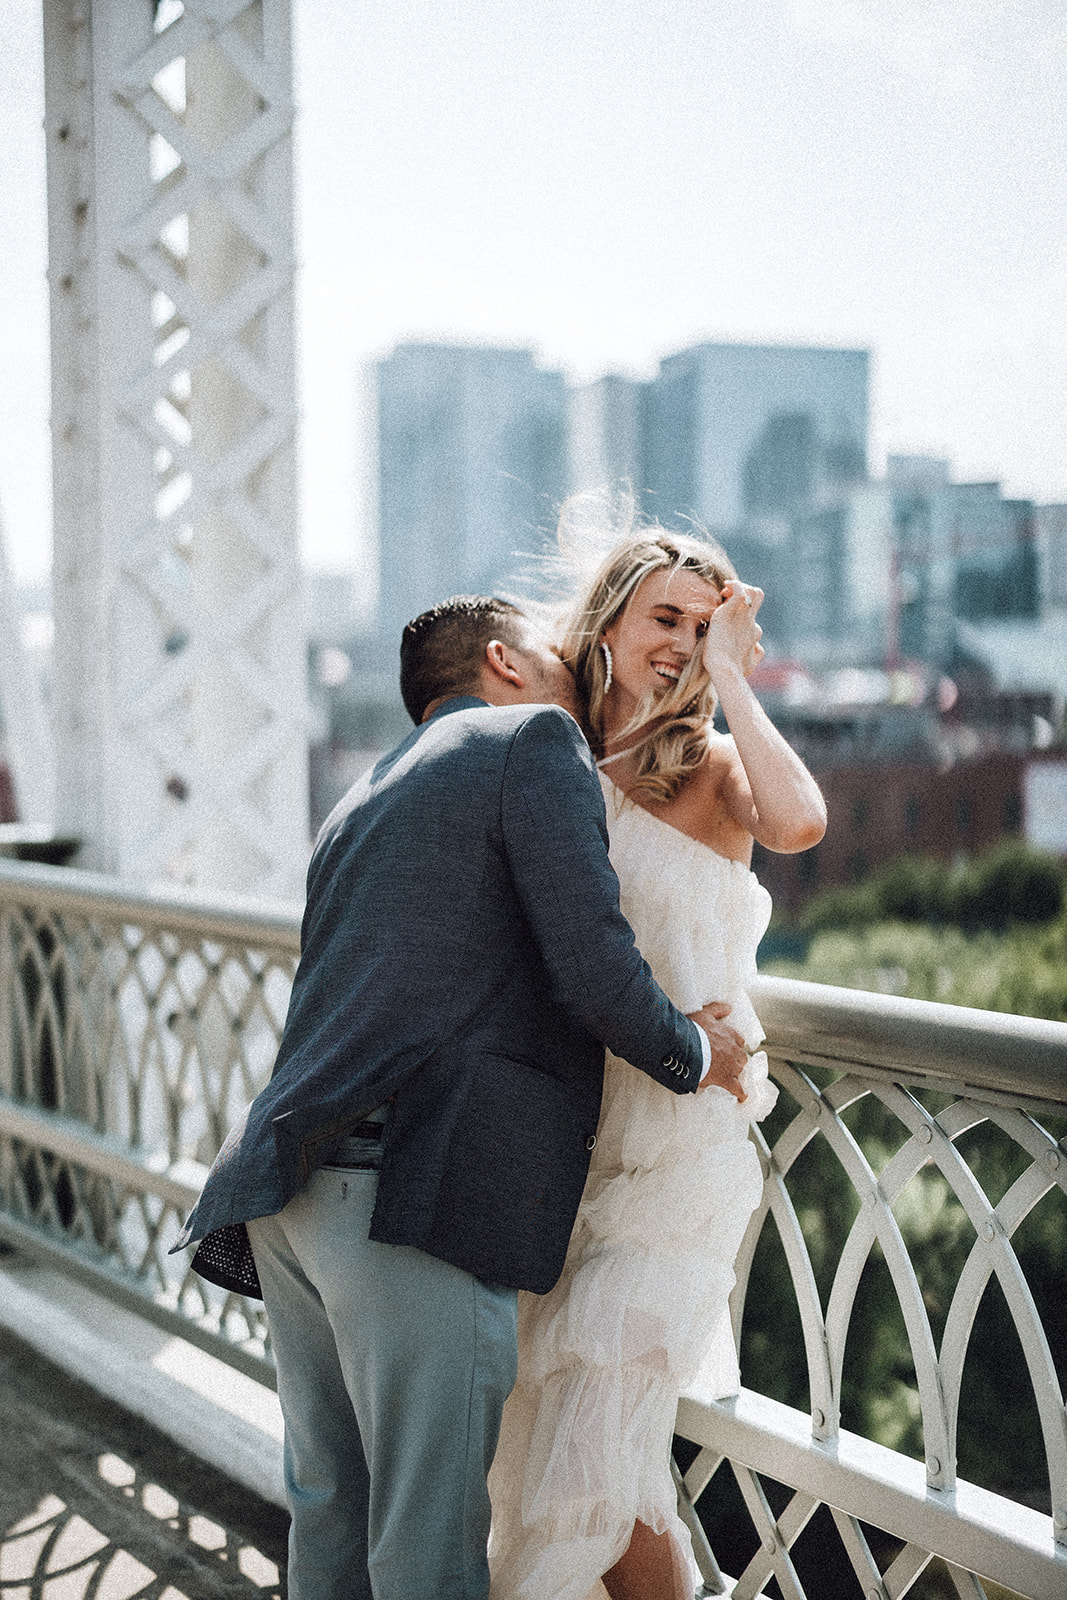 A groom kisses his bride's neck while standing on a bridge